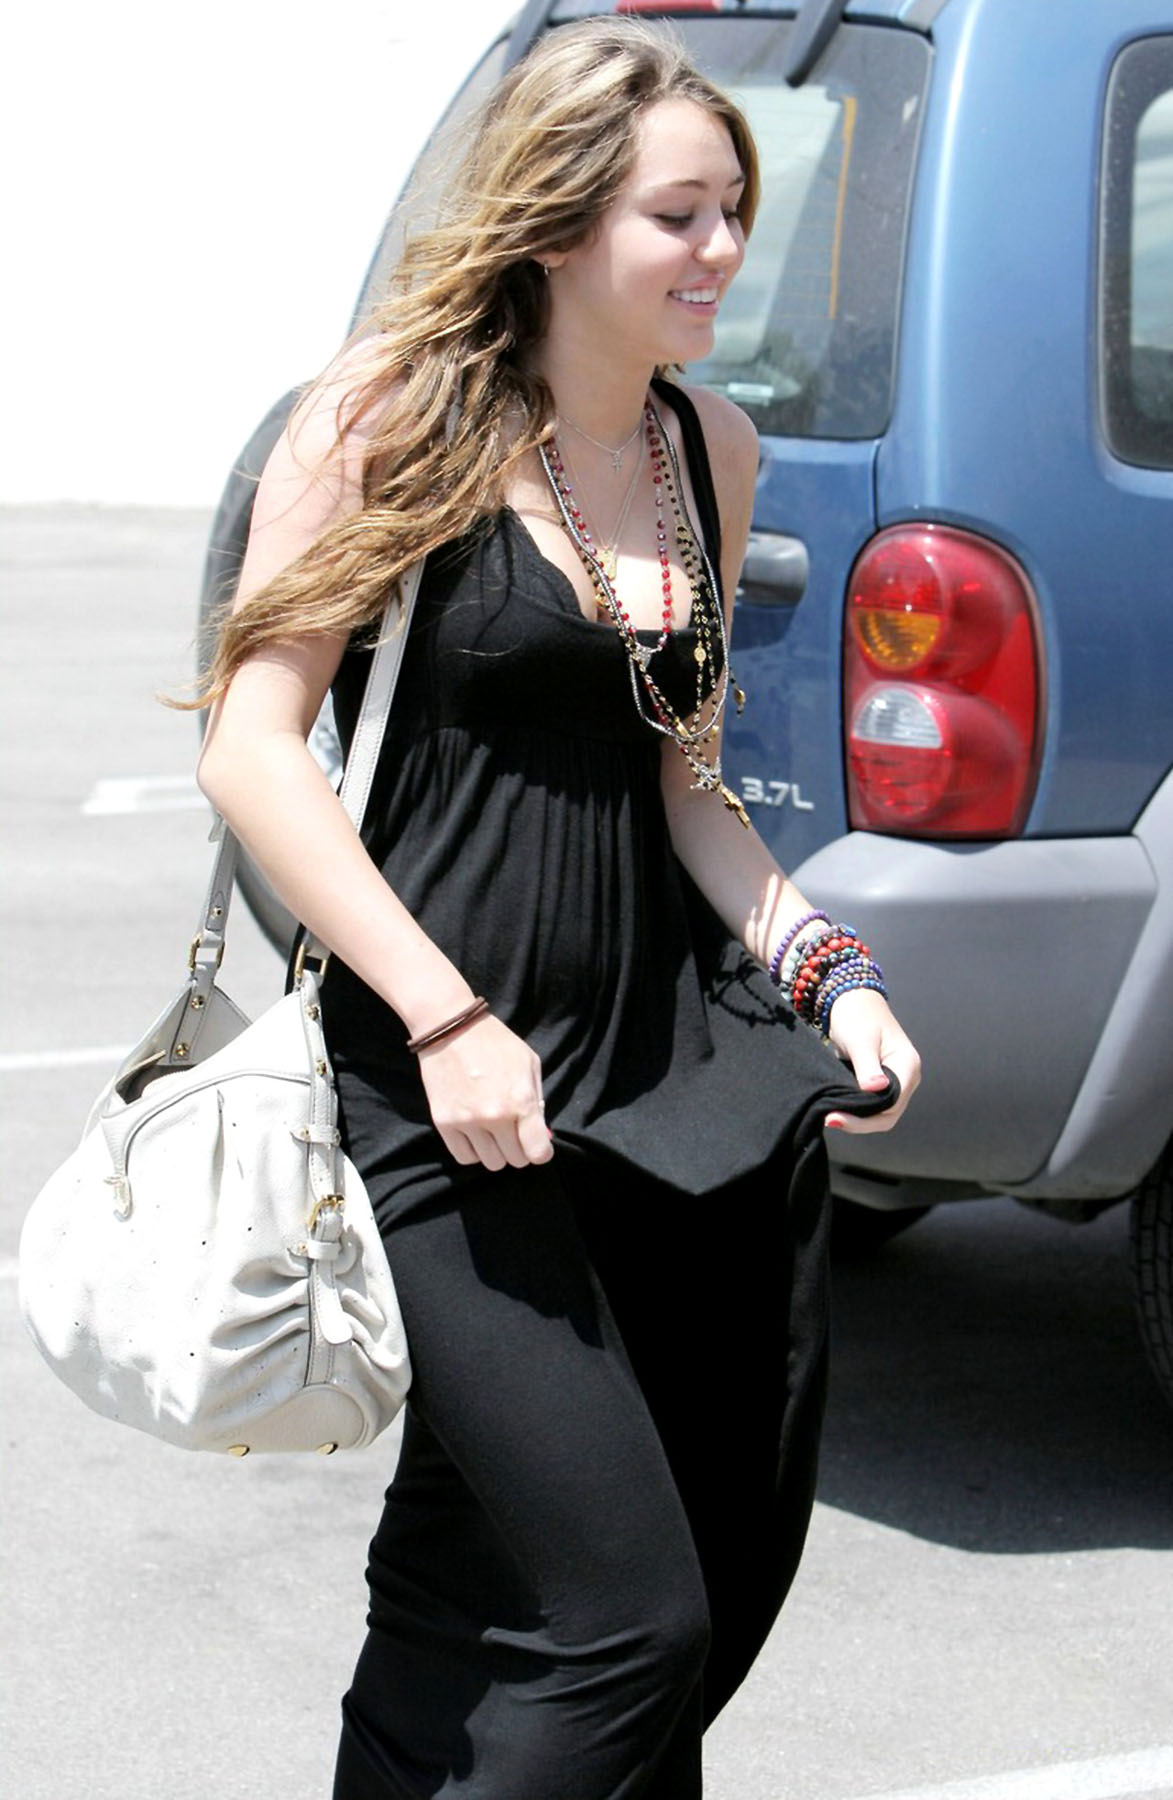 Miley-Cyrus-20090831_Out-n-About-Studio-City_May09_14891.jpg